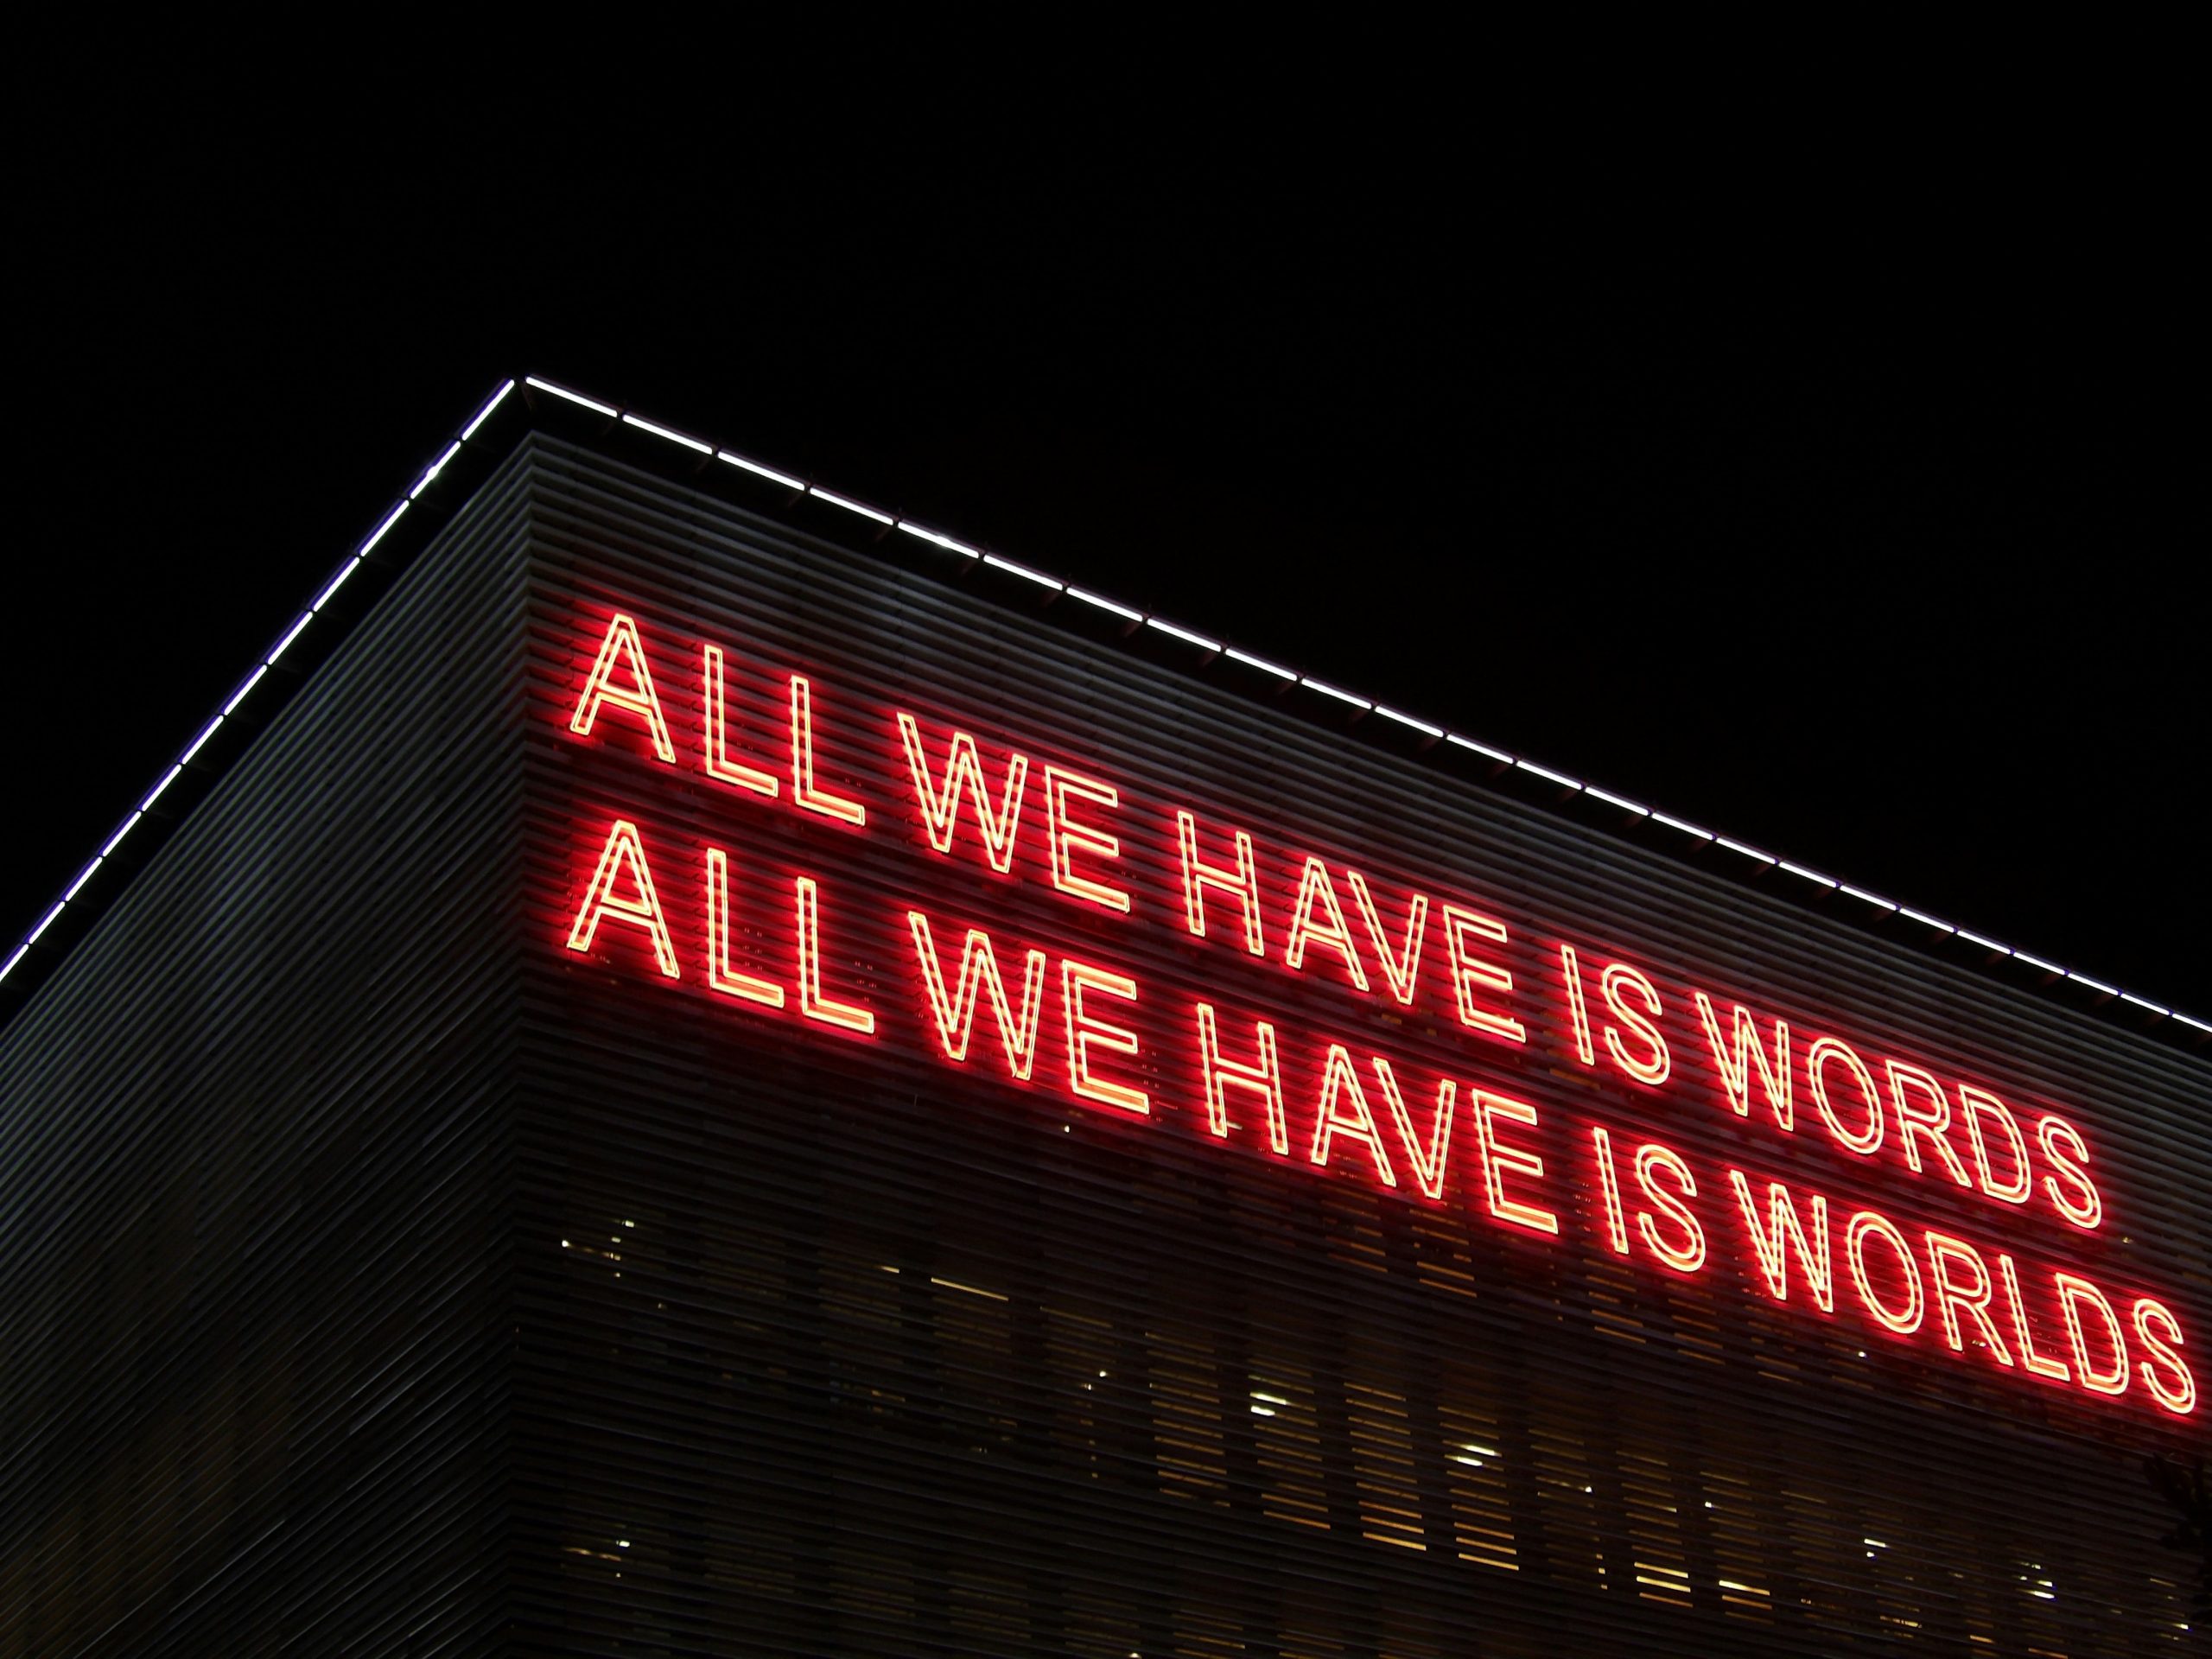 Word count. Quote in red lights "All we have is words. All we have is worlds."